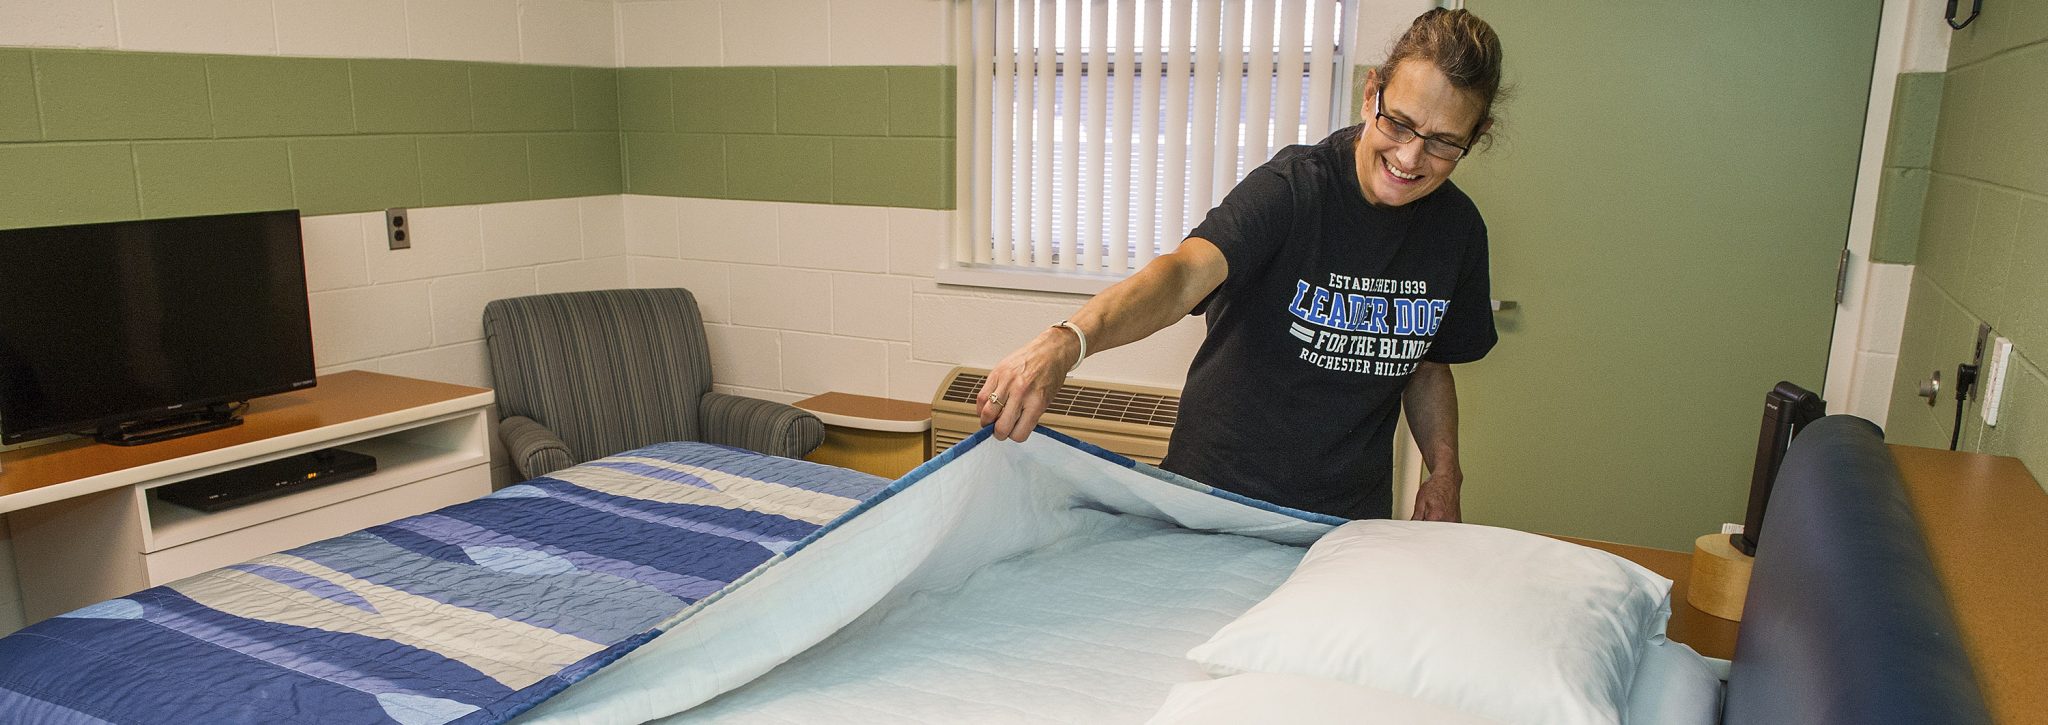 A woman smiles while pulling a blanket over a neatly made bed